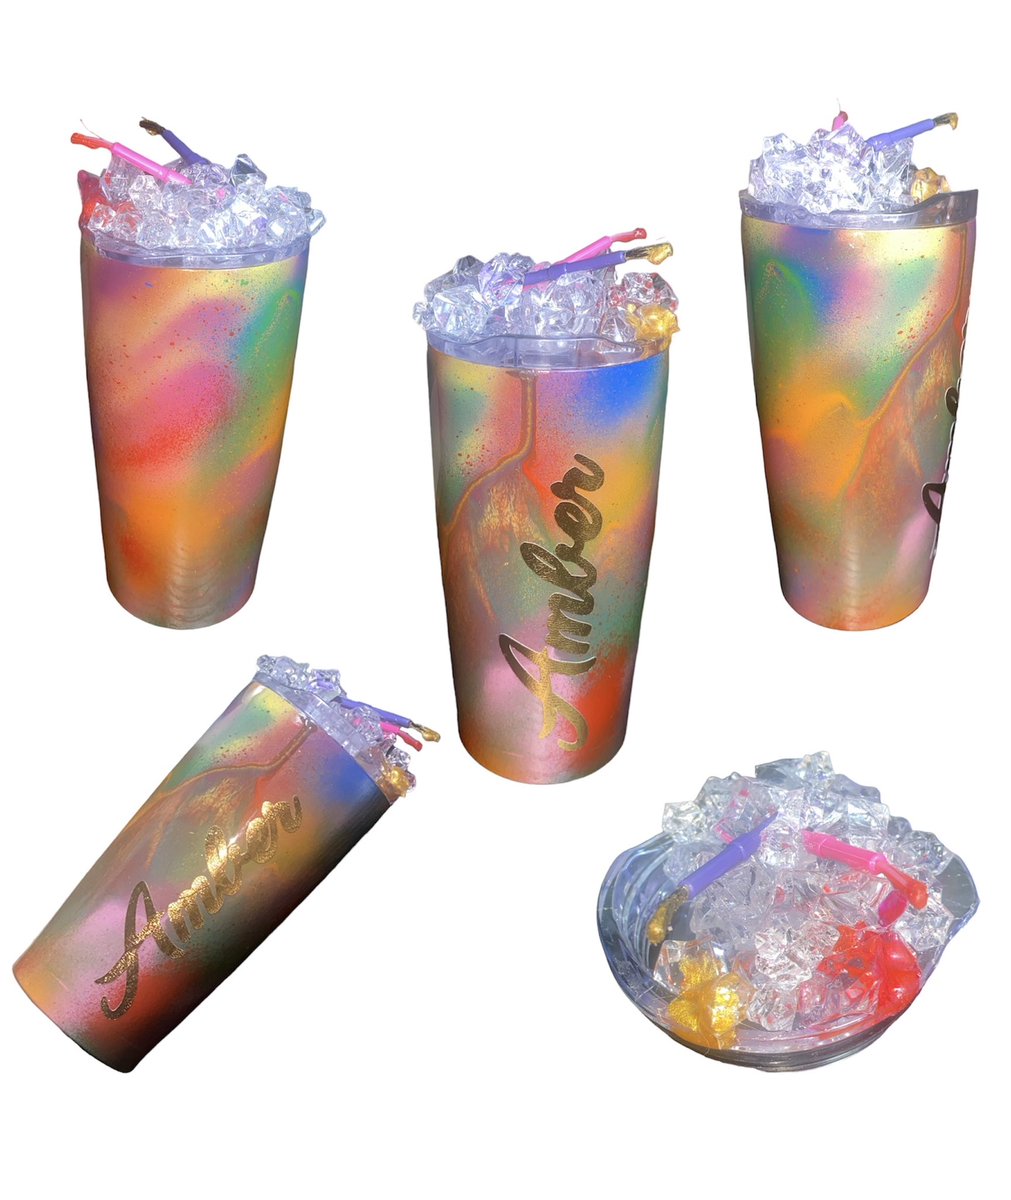 Stop sleeping on me 
#customtumblers #cups #customized